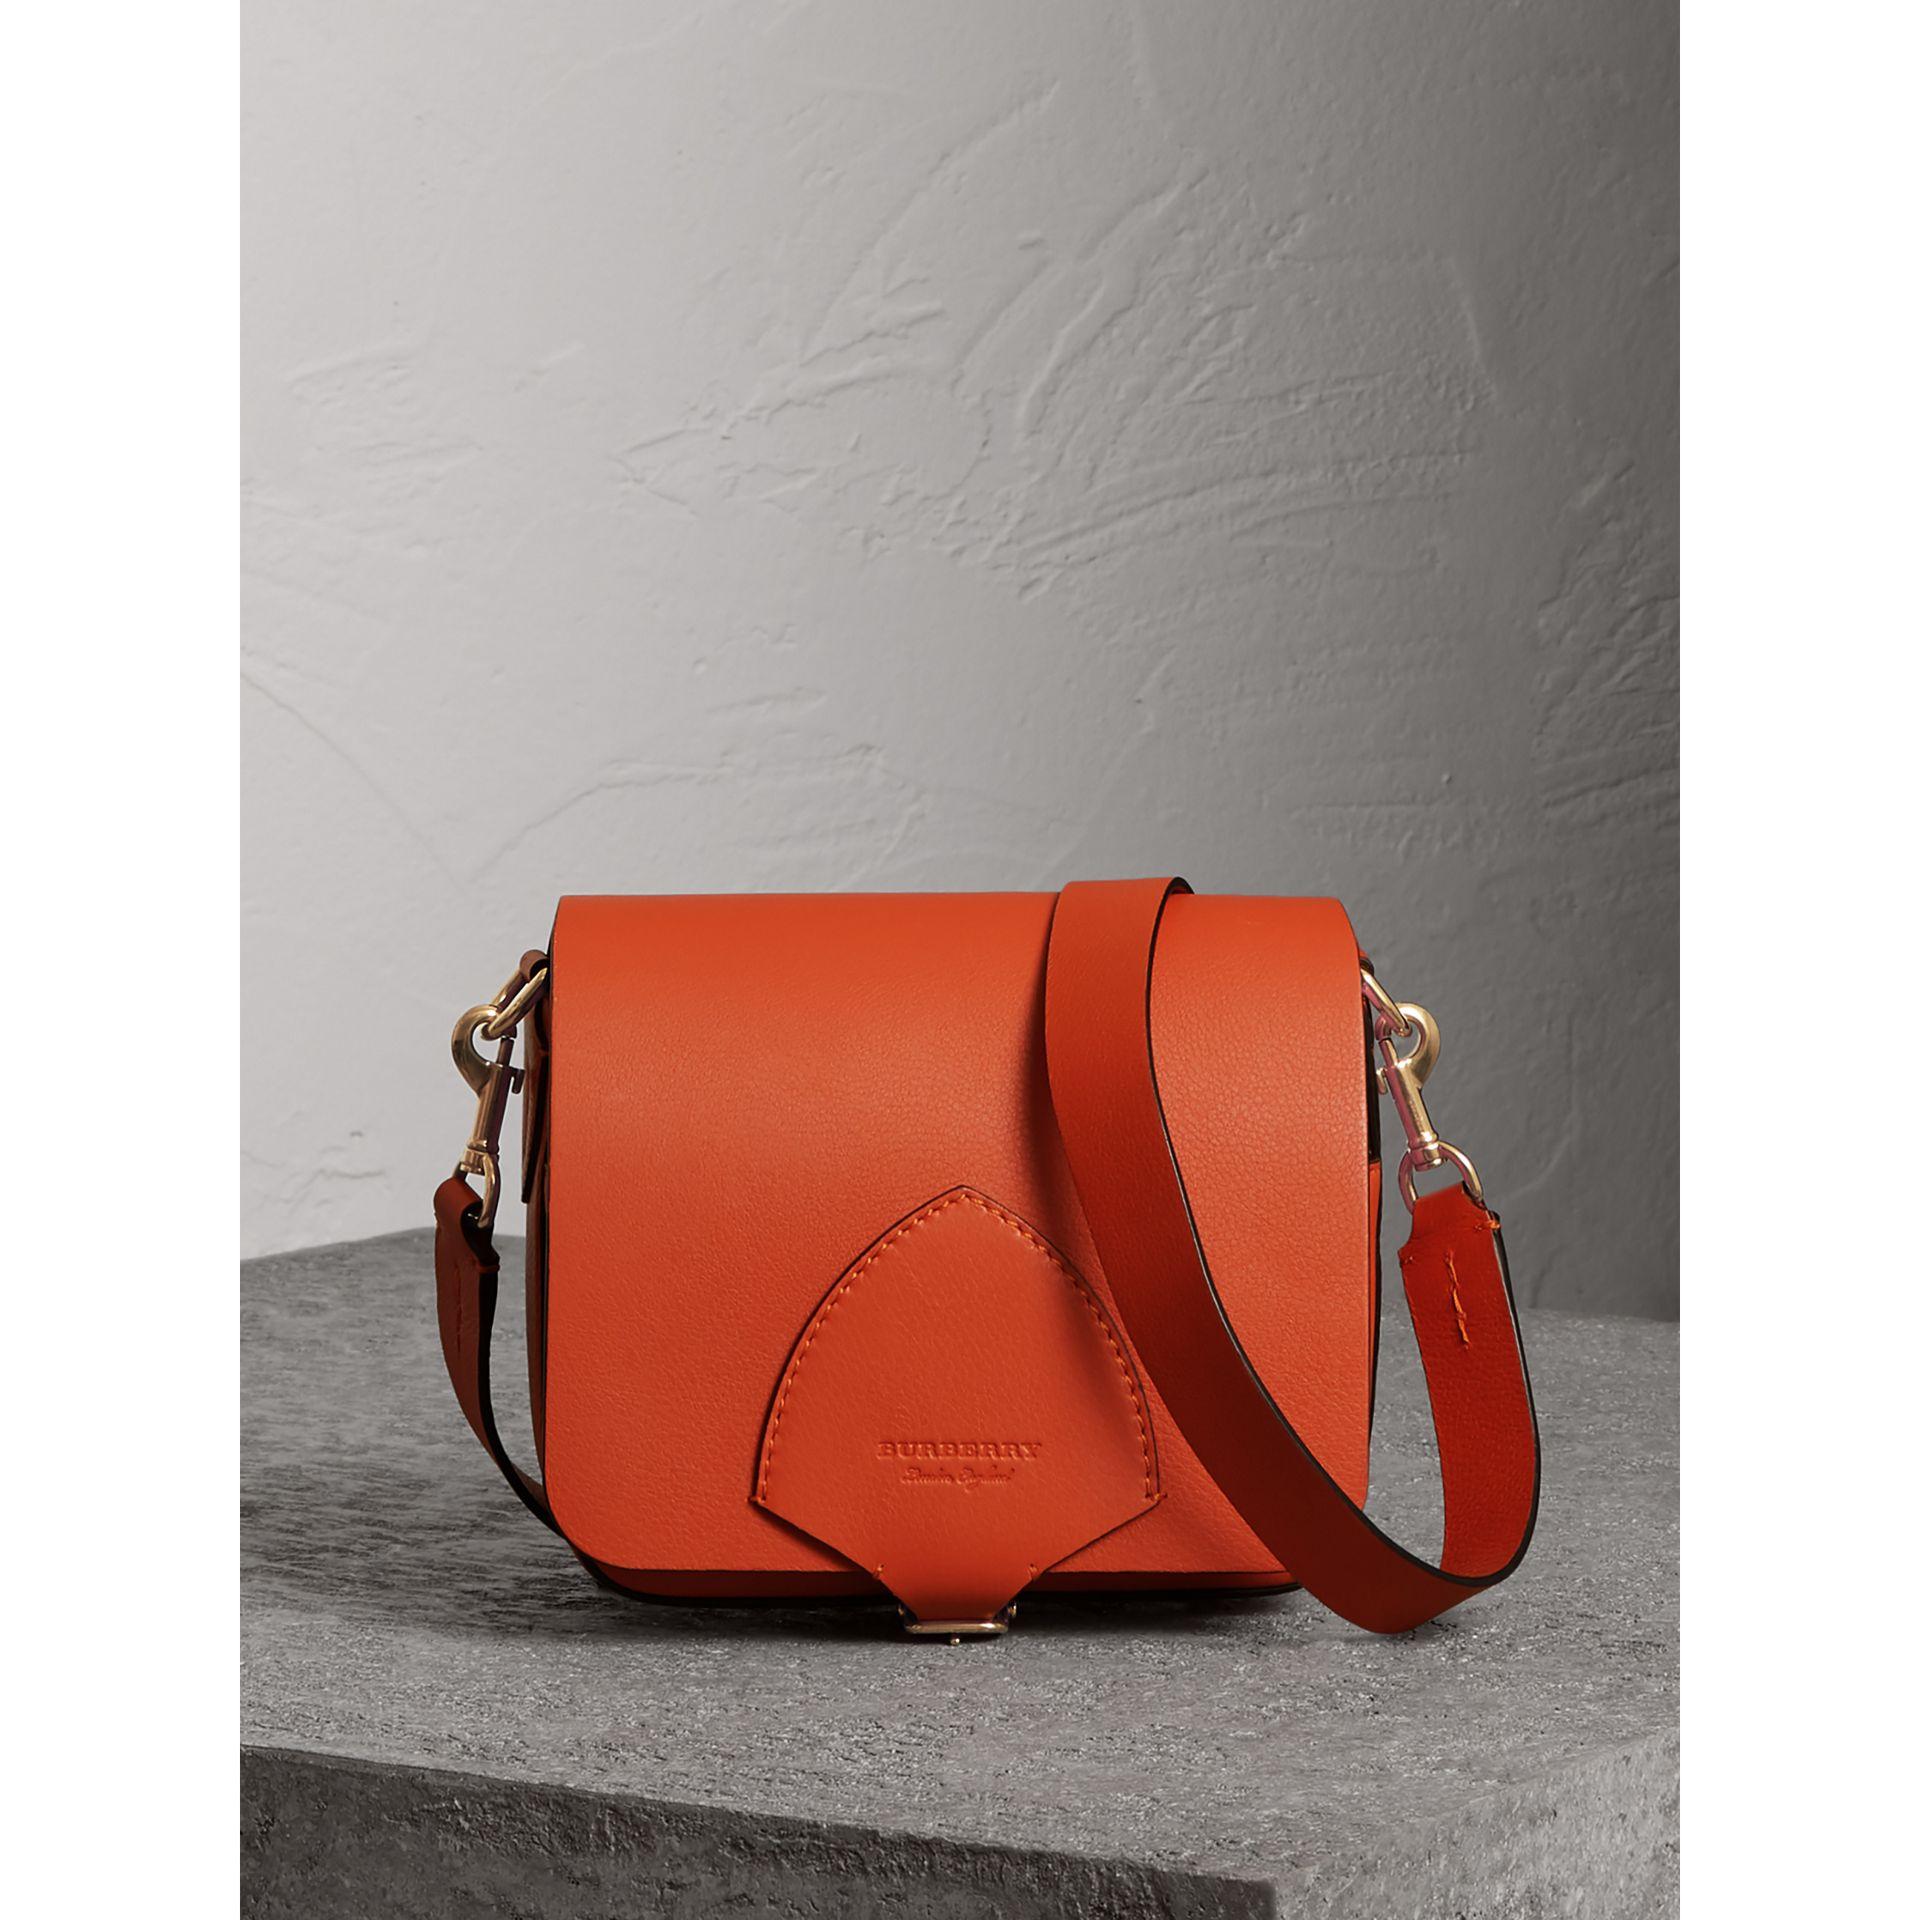 burberry the square satchel in leather